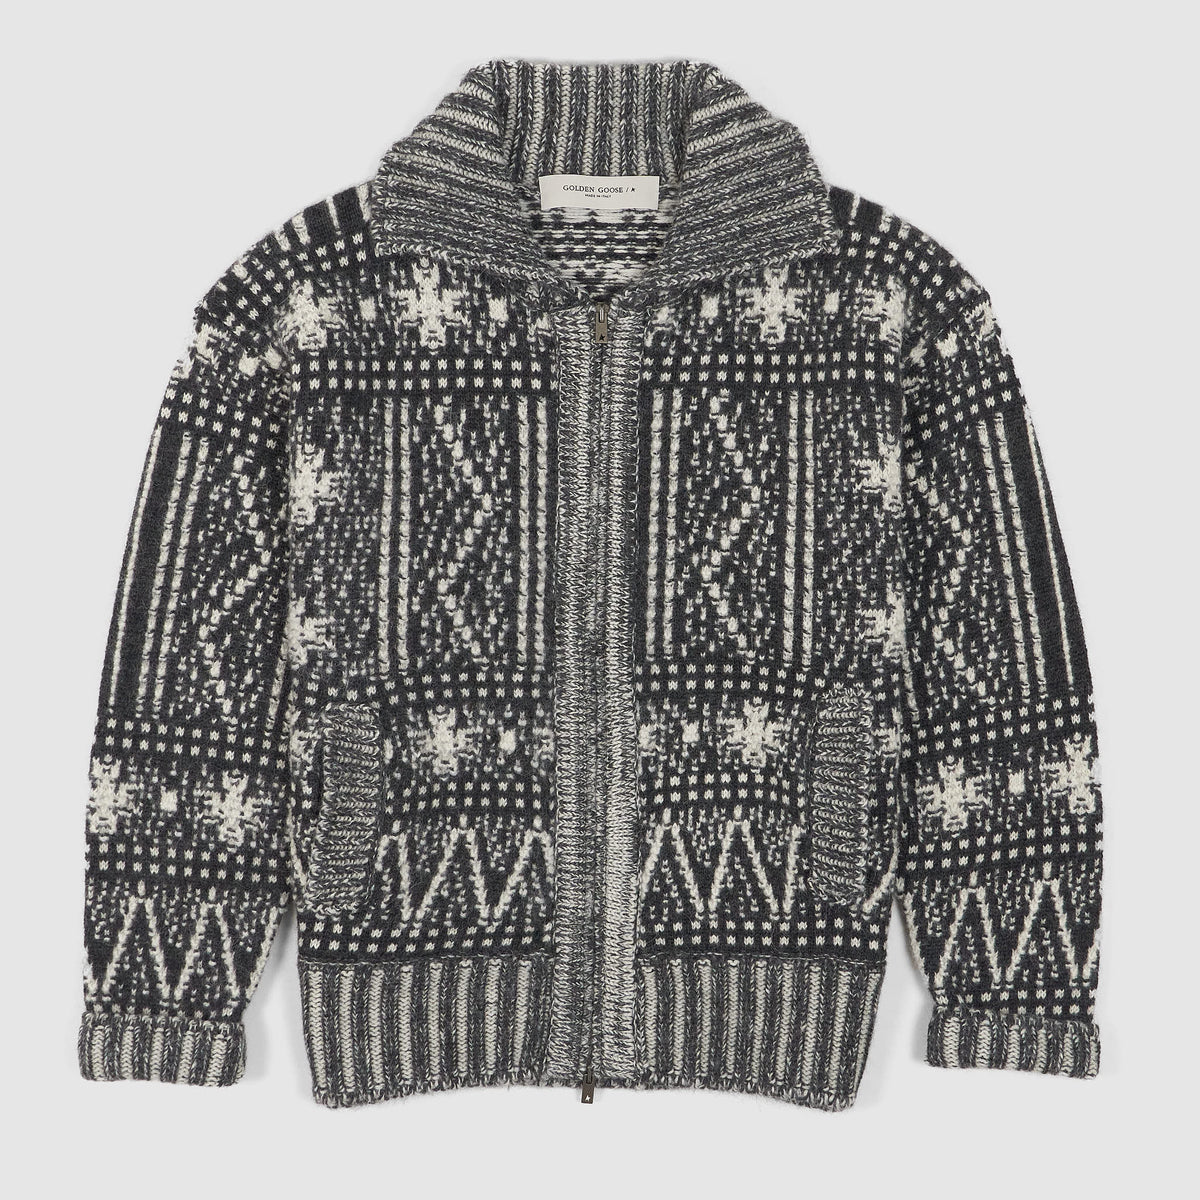 Golden Goose  Relaxed Fitted Gender Neutral  Fair Isle Cardigan